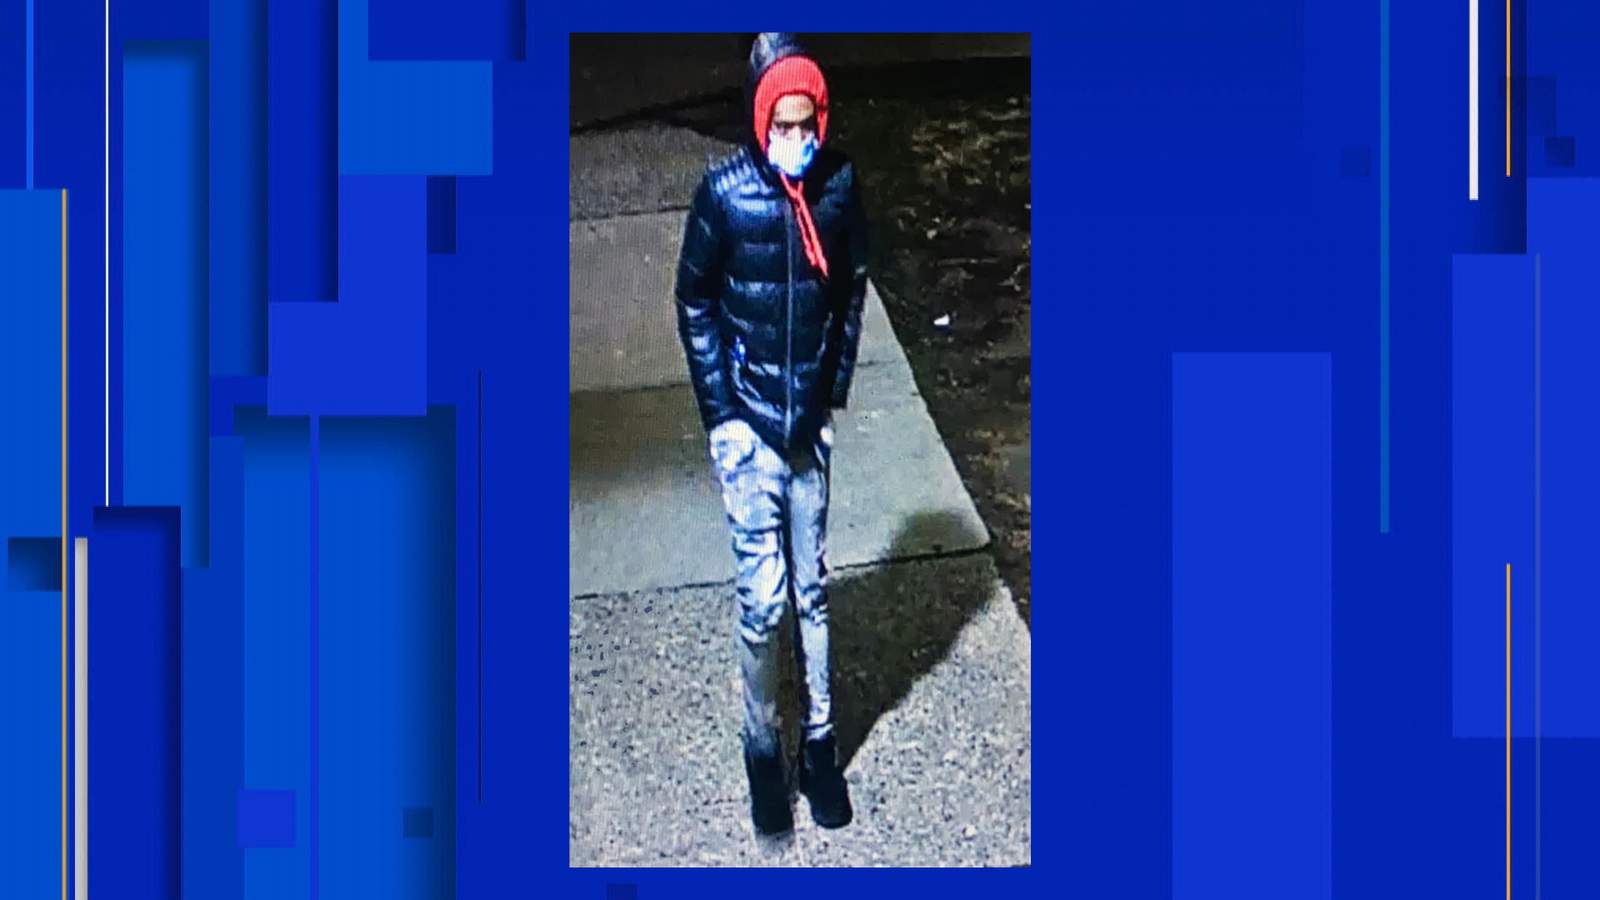 Detroit police seek person of interest in connection with carjacking on city’s west side